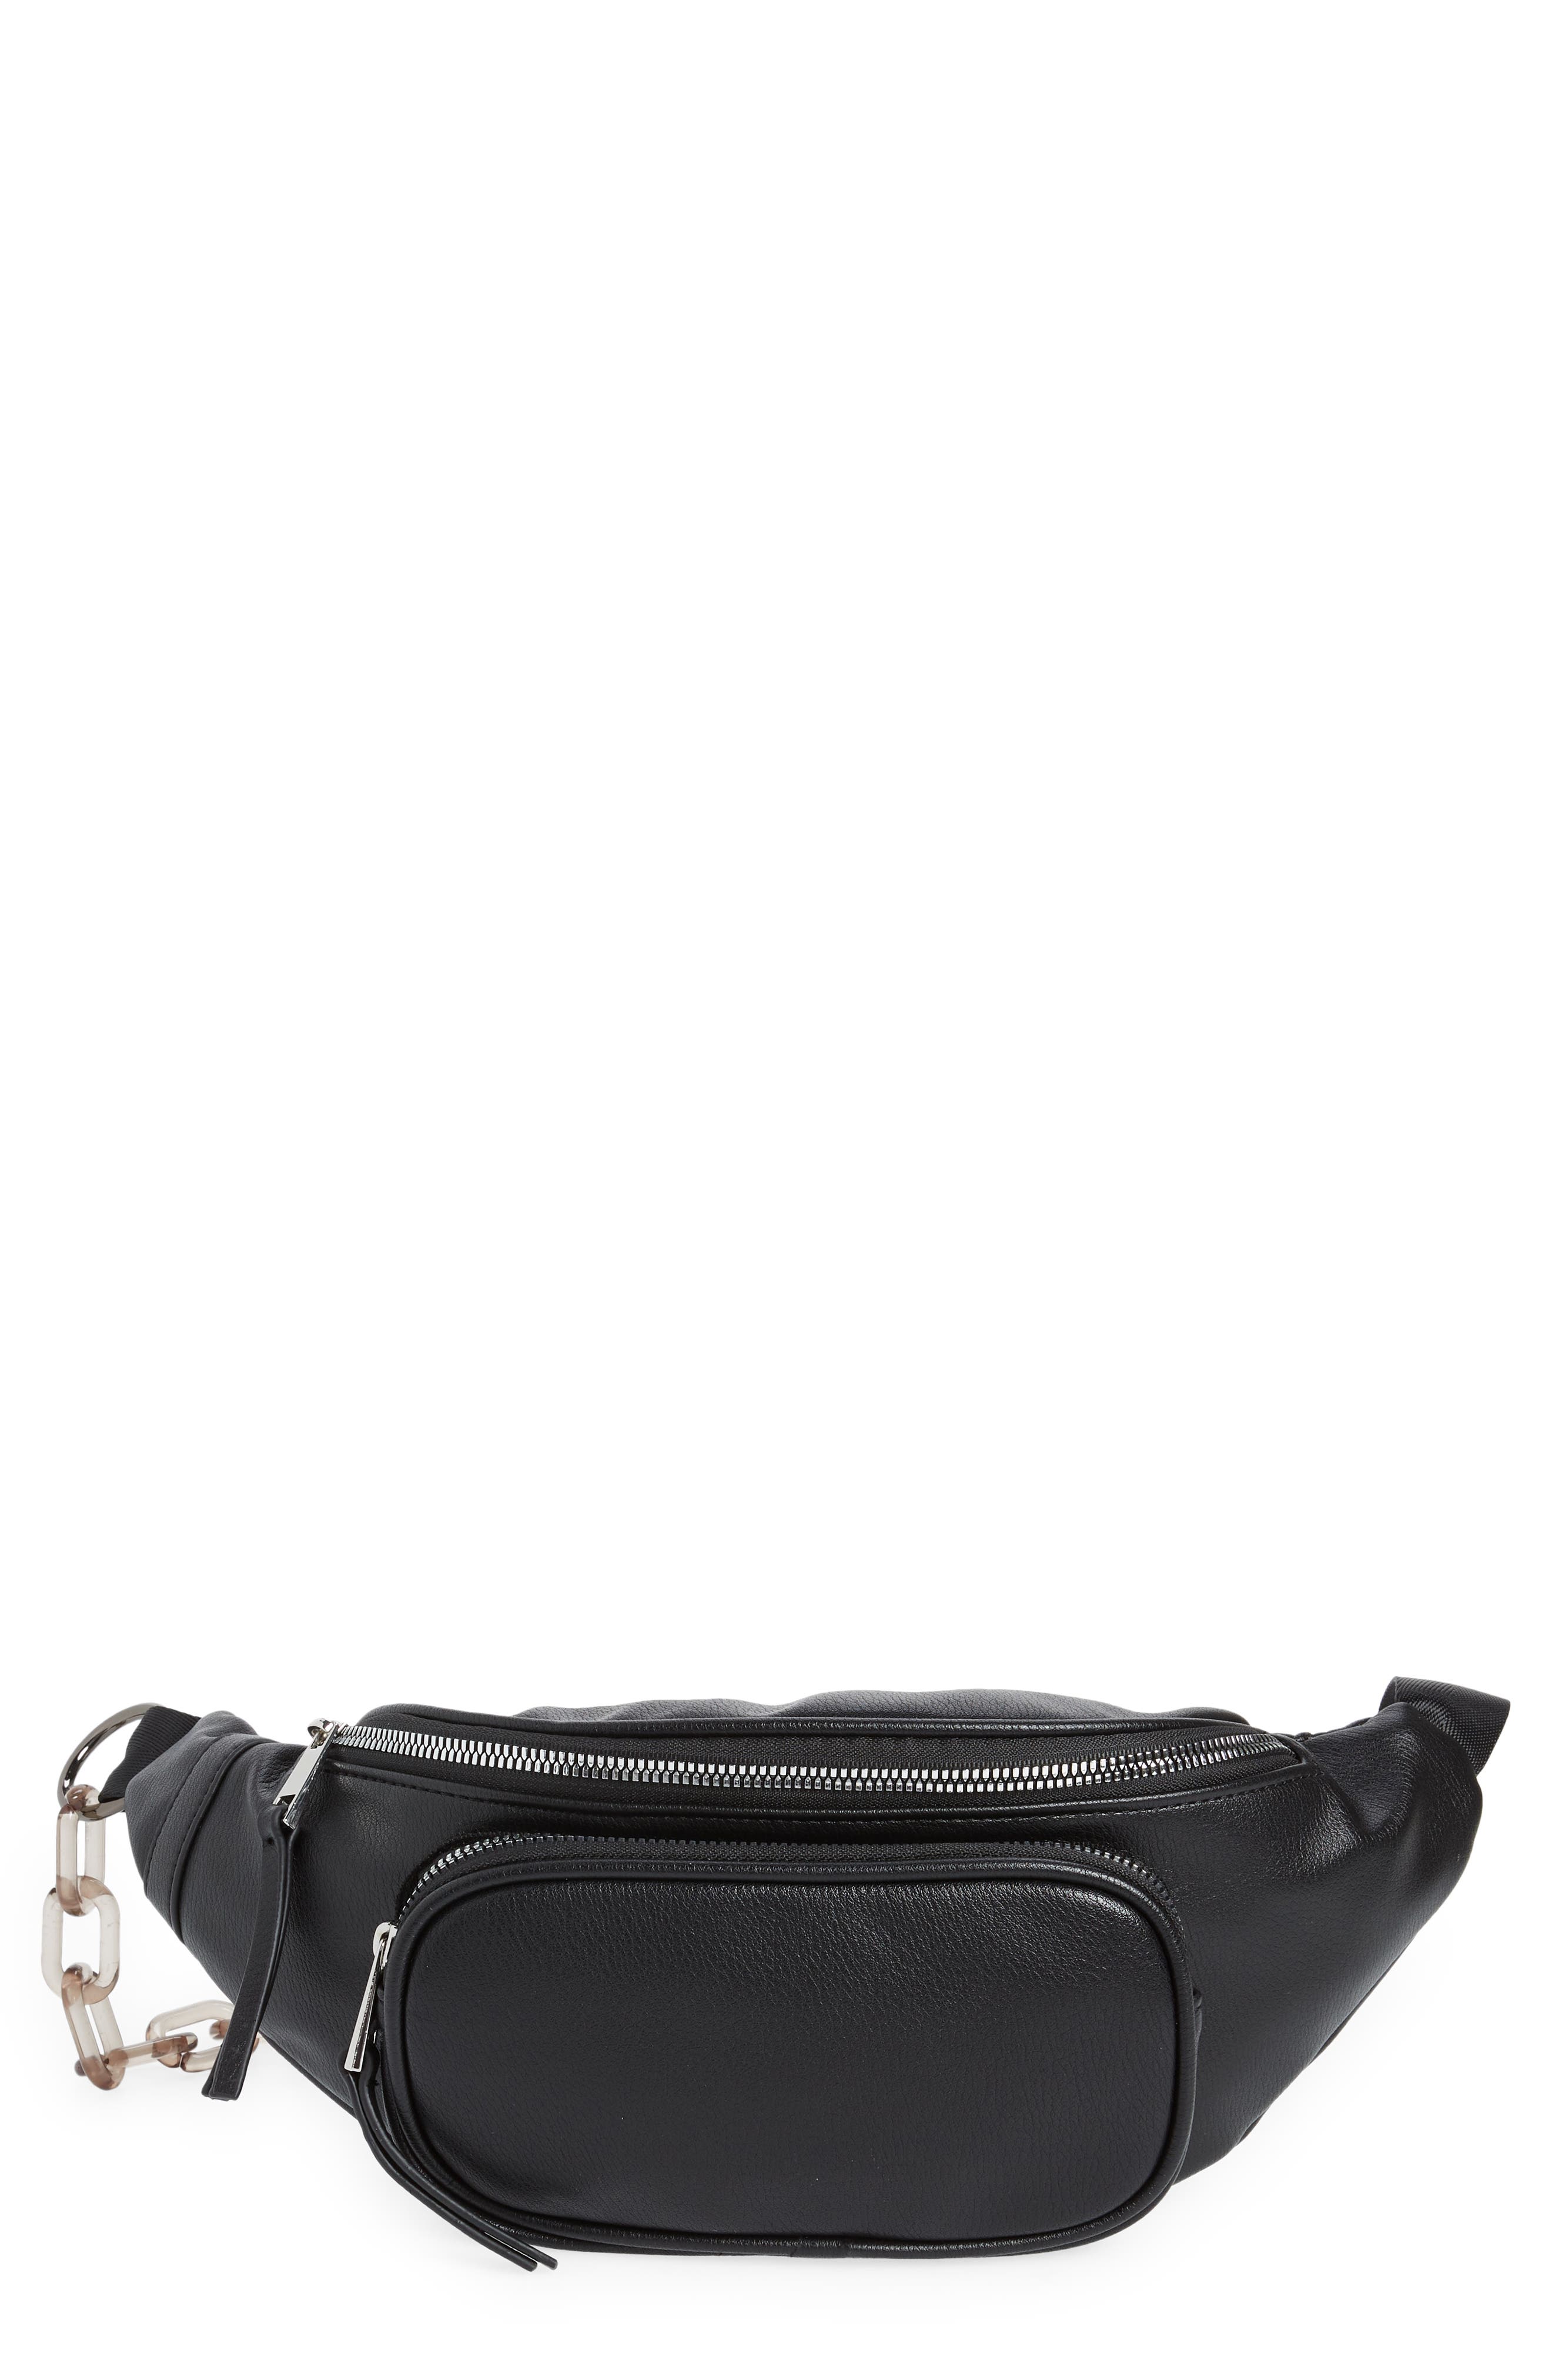 Details about   NEW TOPSHOP Soft Real Leather Satchel Messenger Cross Body Bag Limited Edition